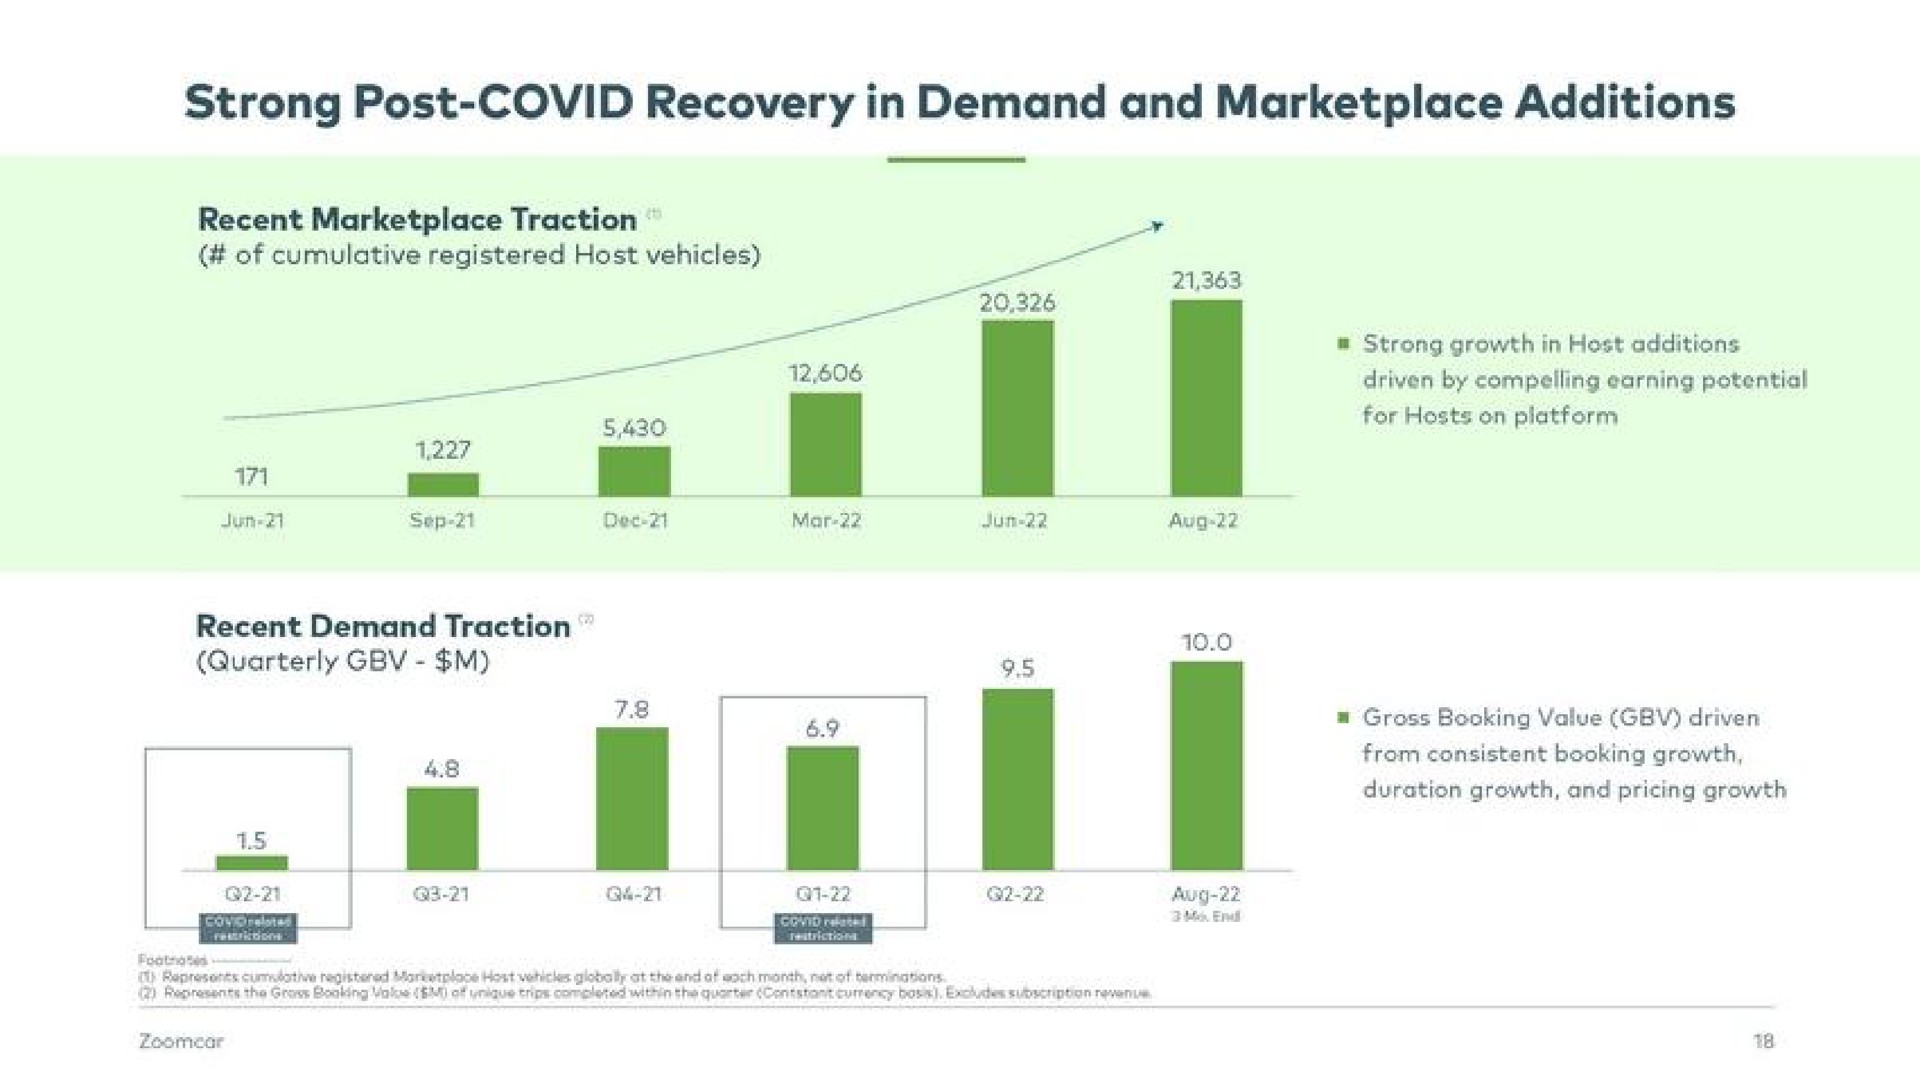 strong post covid recovery in demand and additions | Zoomcar